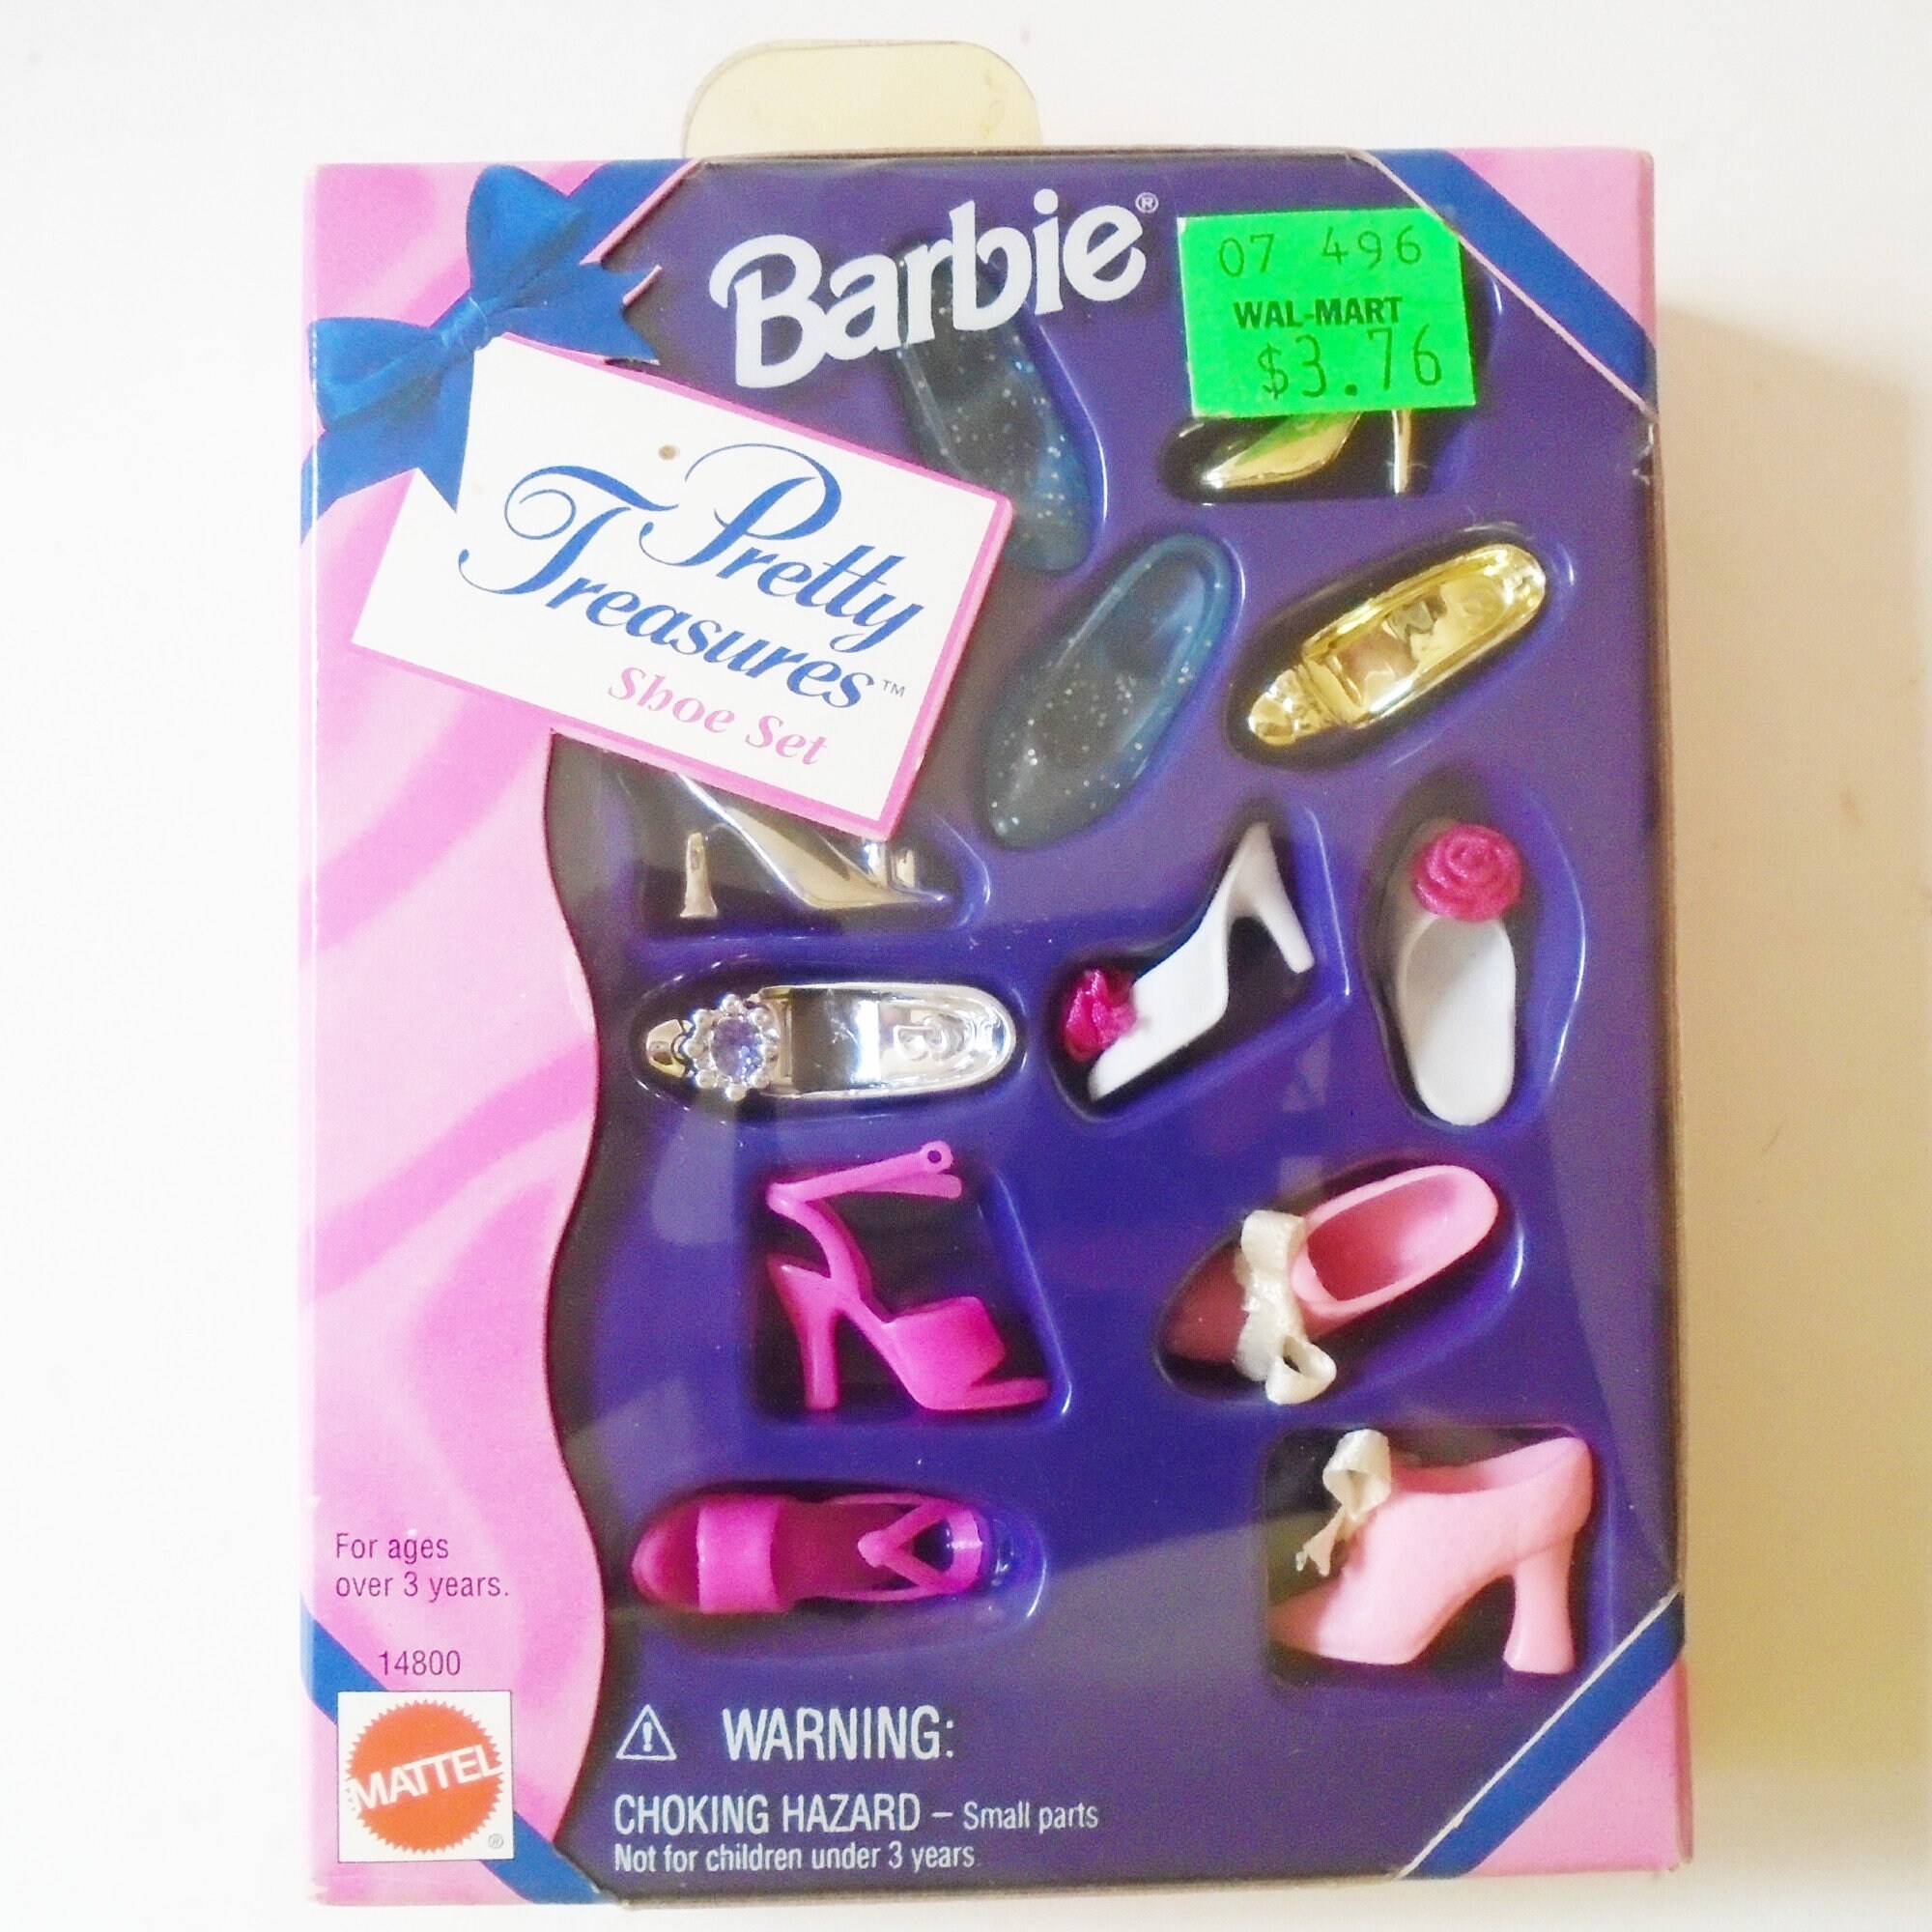 Barbie Shoe Accessory Bundle with 10 Total Pairs of Doll Shoes